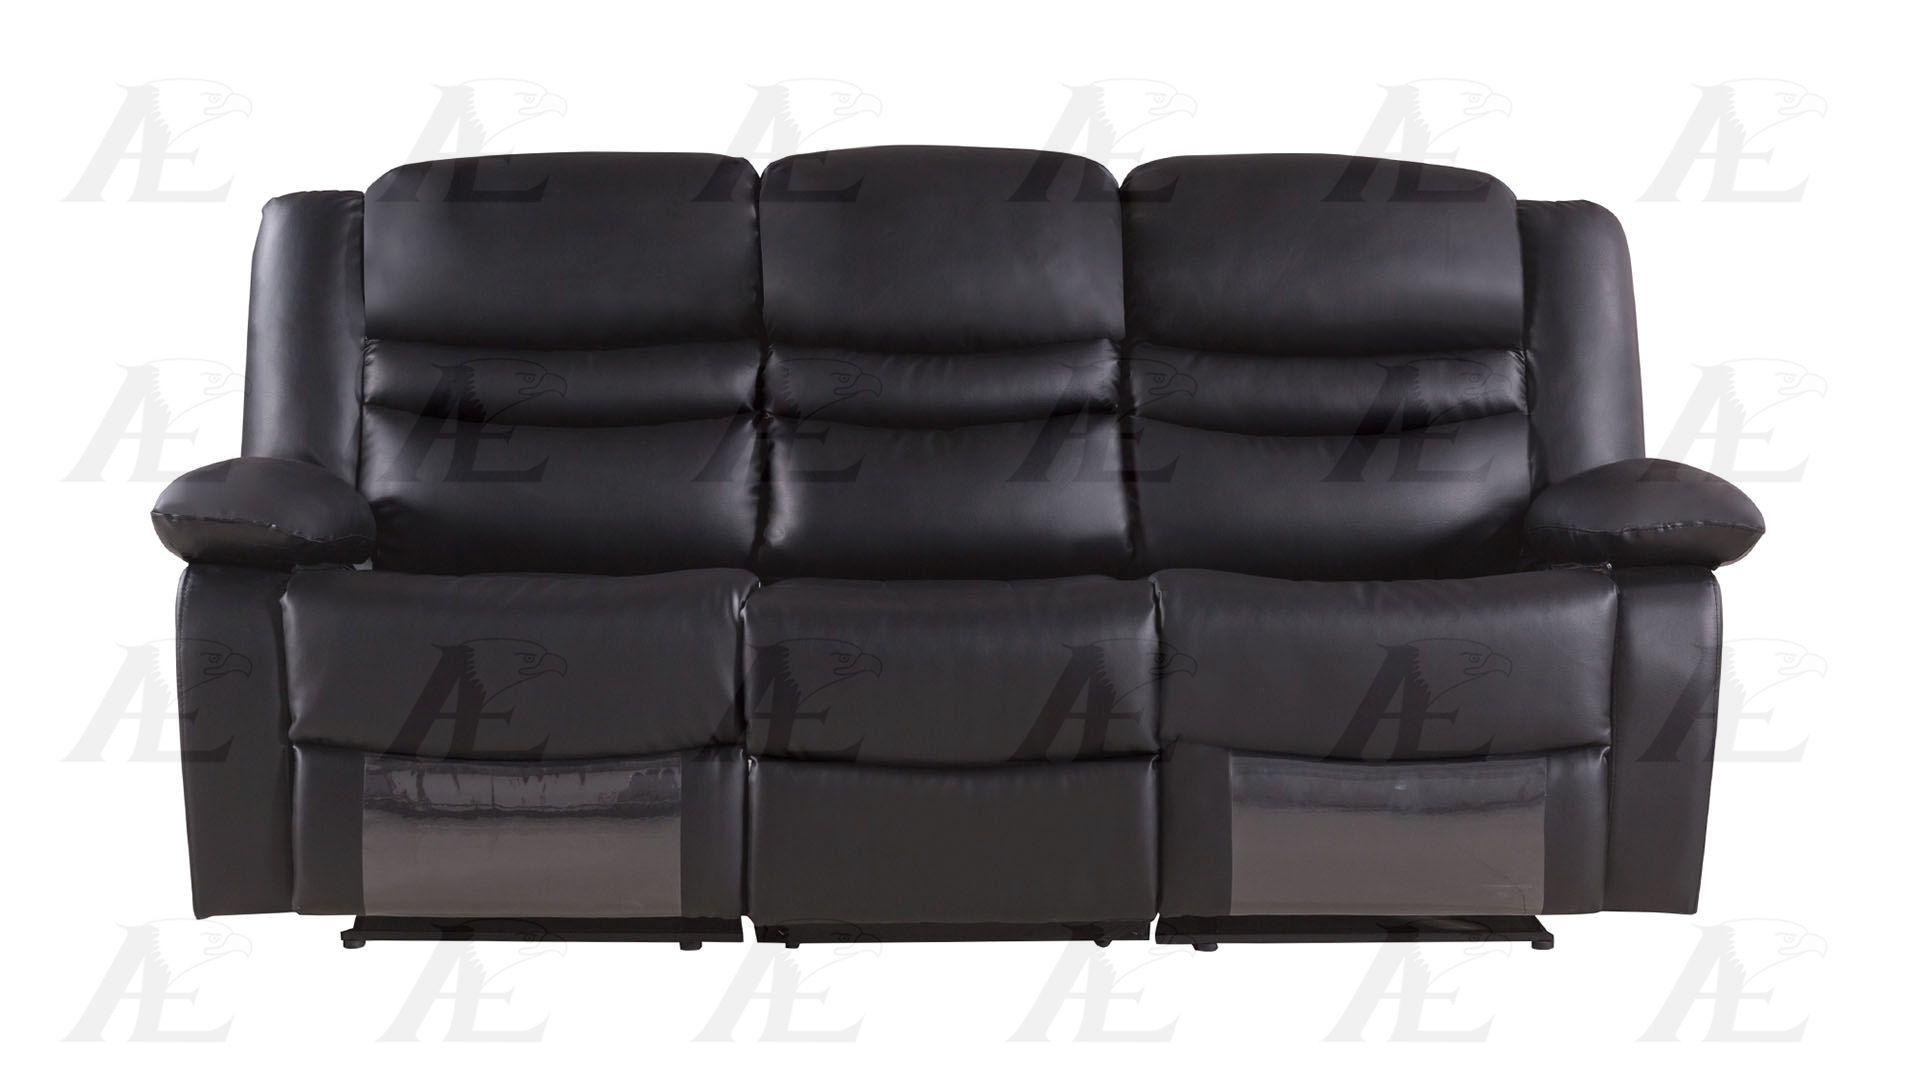 

    
American Eagle Furniture AE-D823-BK Black Recliner Sofa  Loveseat and Chair Set Bonded Leather 3Pcs Modern
